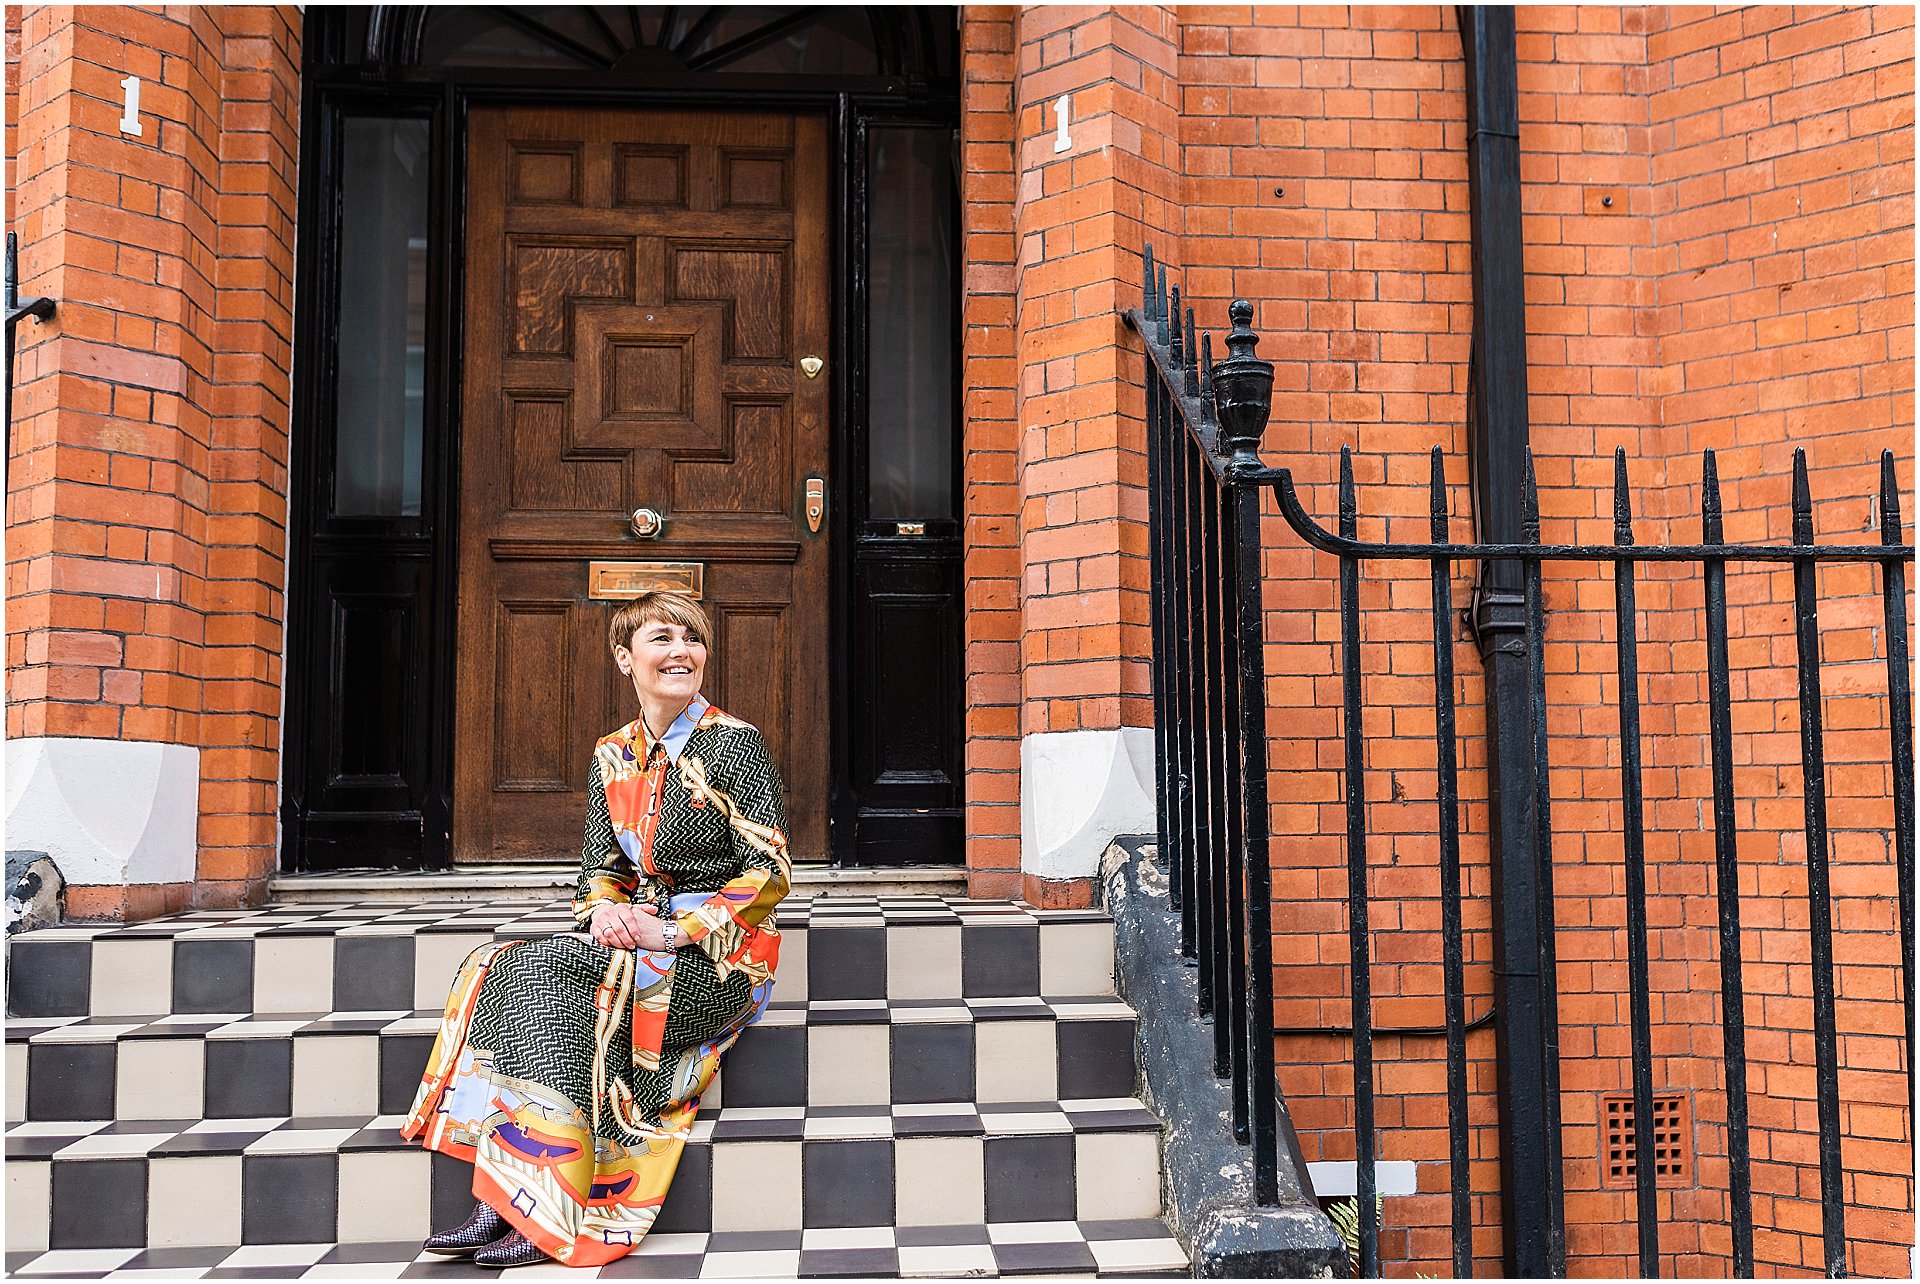 Lisa Talbot, stylist is sitting on some chequered steps in front of a red brick building. She is a wearing a patterned dress. Images by London brand photographer AKP Branding Stories